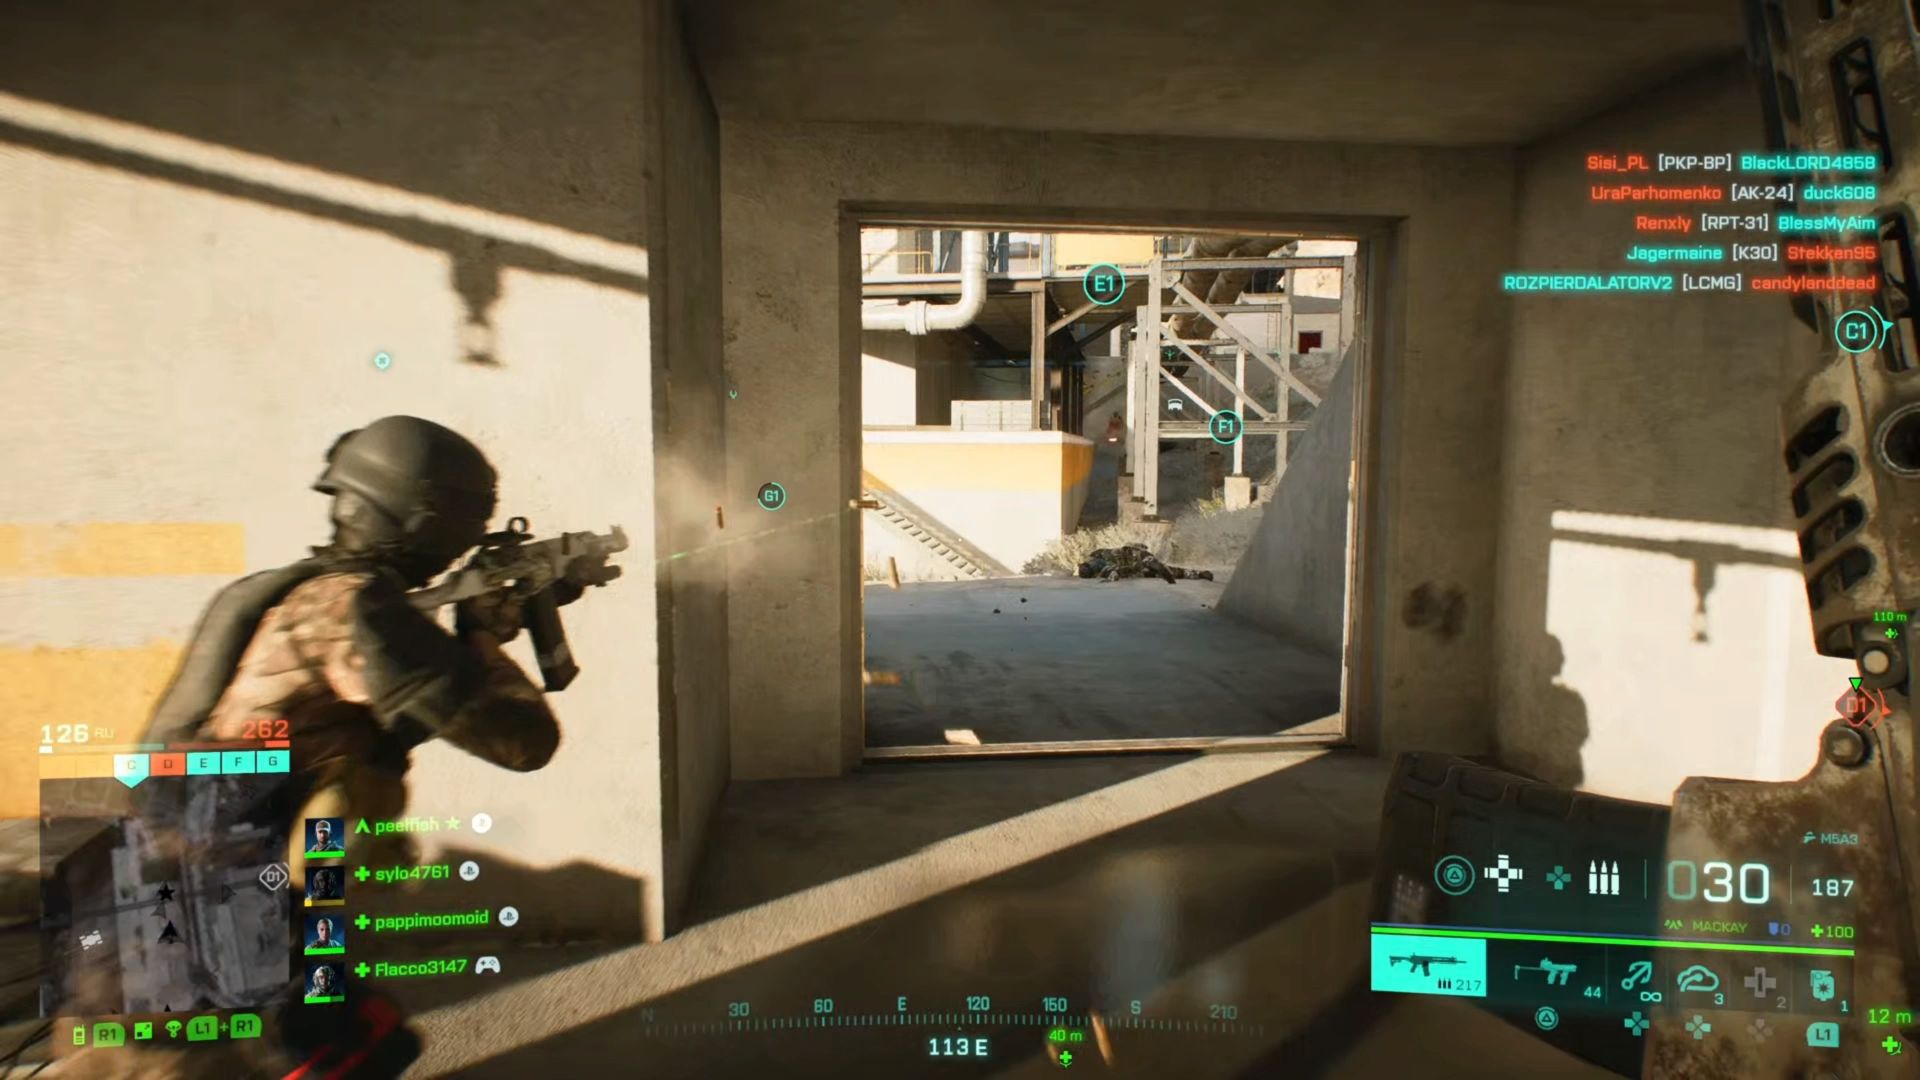 State of the Game Battlefield 2042 - reloading while a teammate fires through a window in front of you